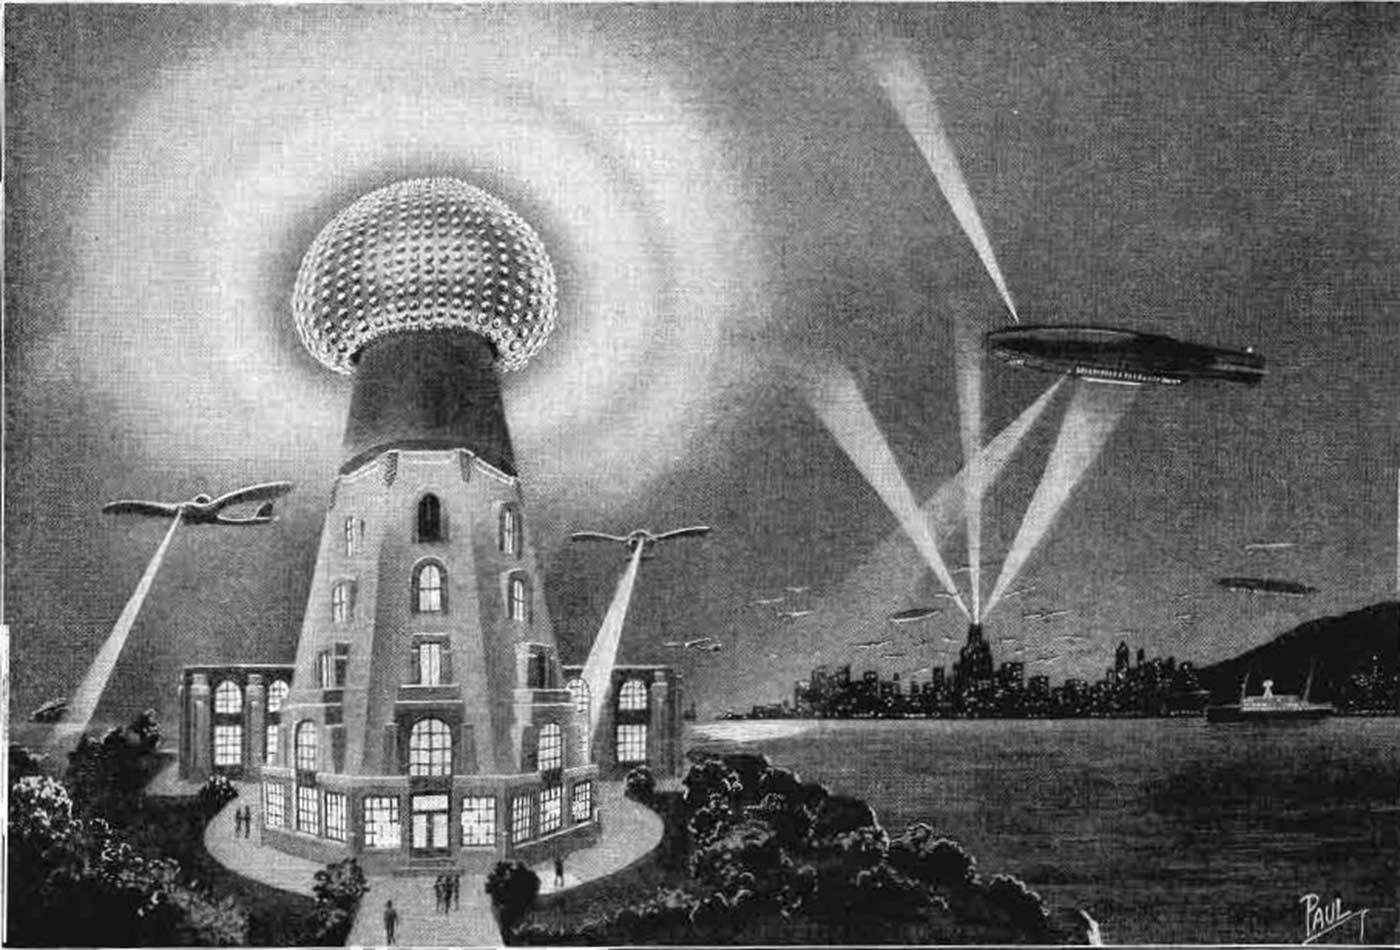 A 1925 artist's conception of what Nikola Tesla's wireless power transmission system might look like in the future